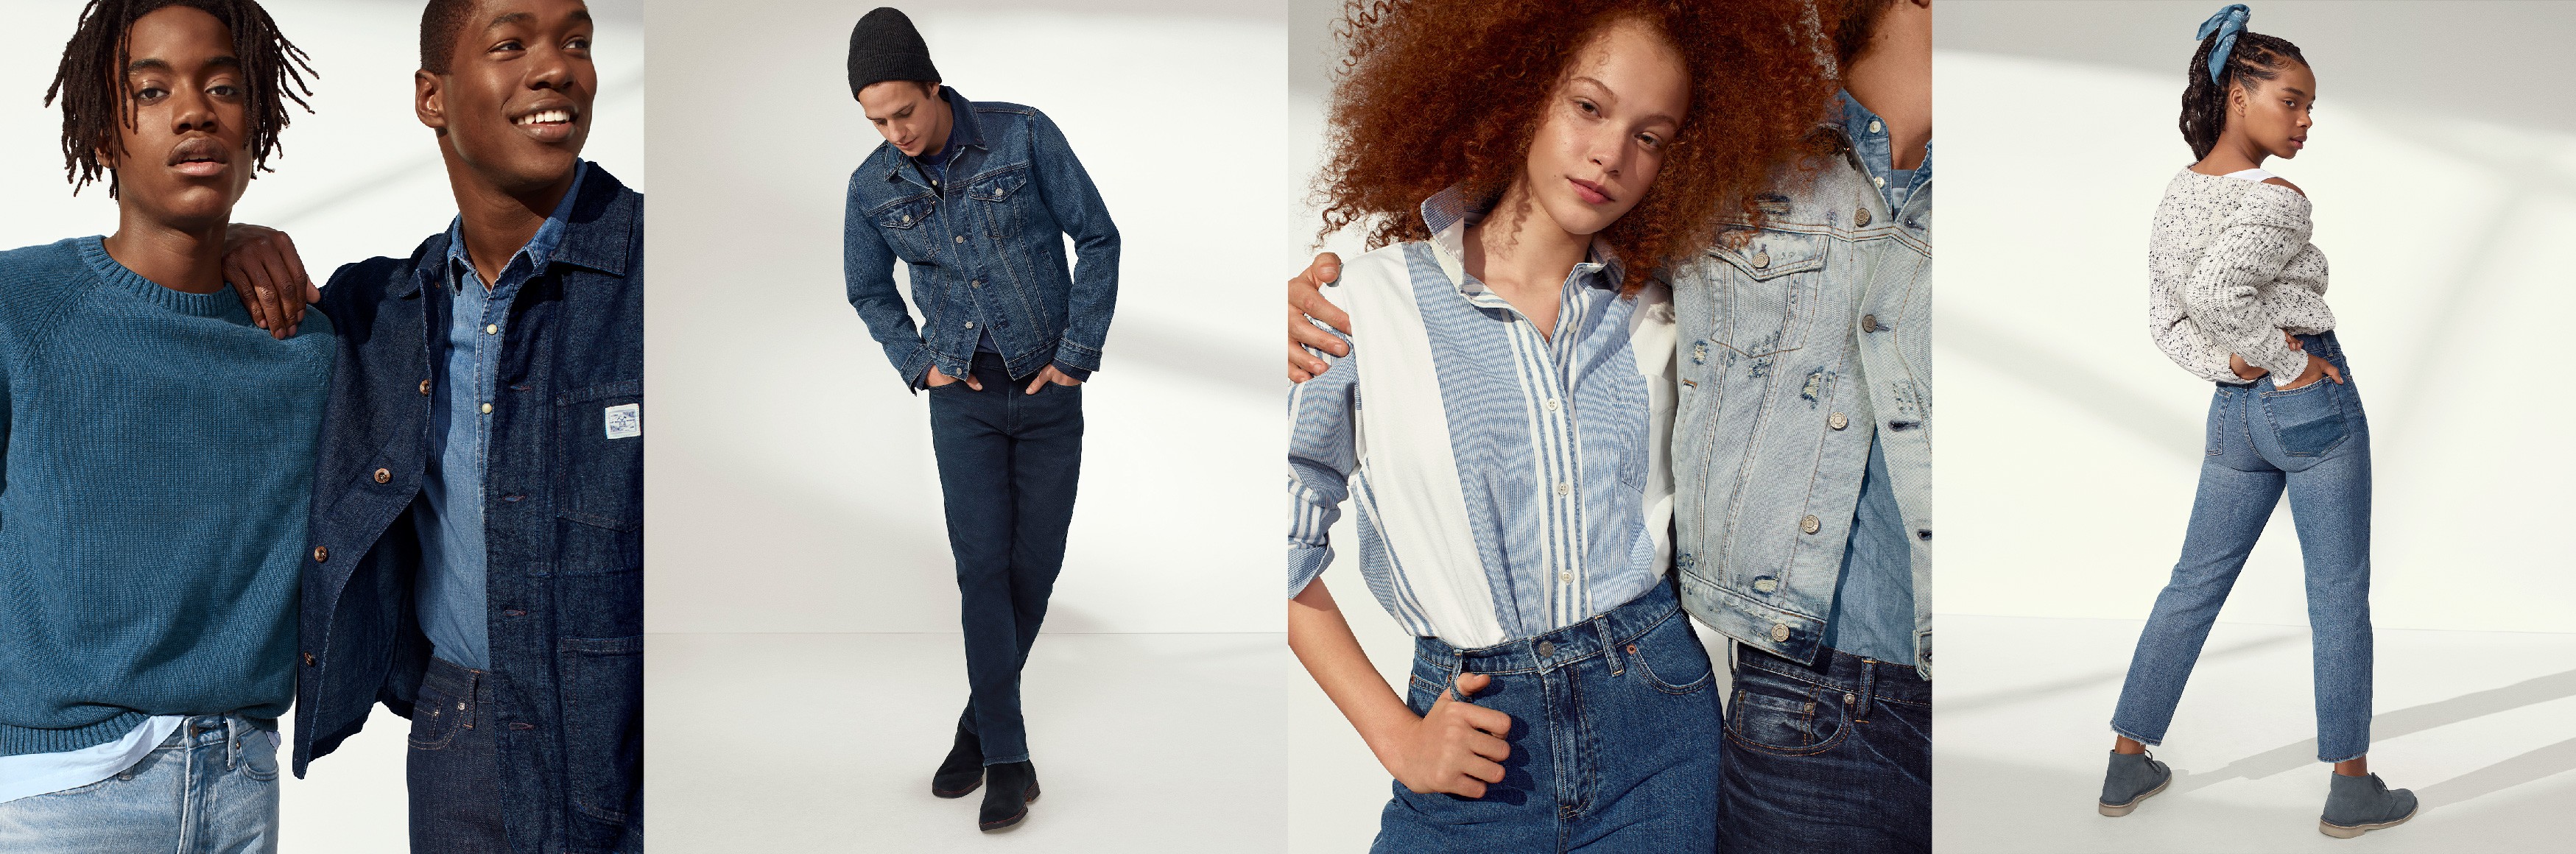 Up to 50% Off Women's & Men's Styles + an extra 10% off reg price items with code SMILE